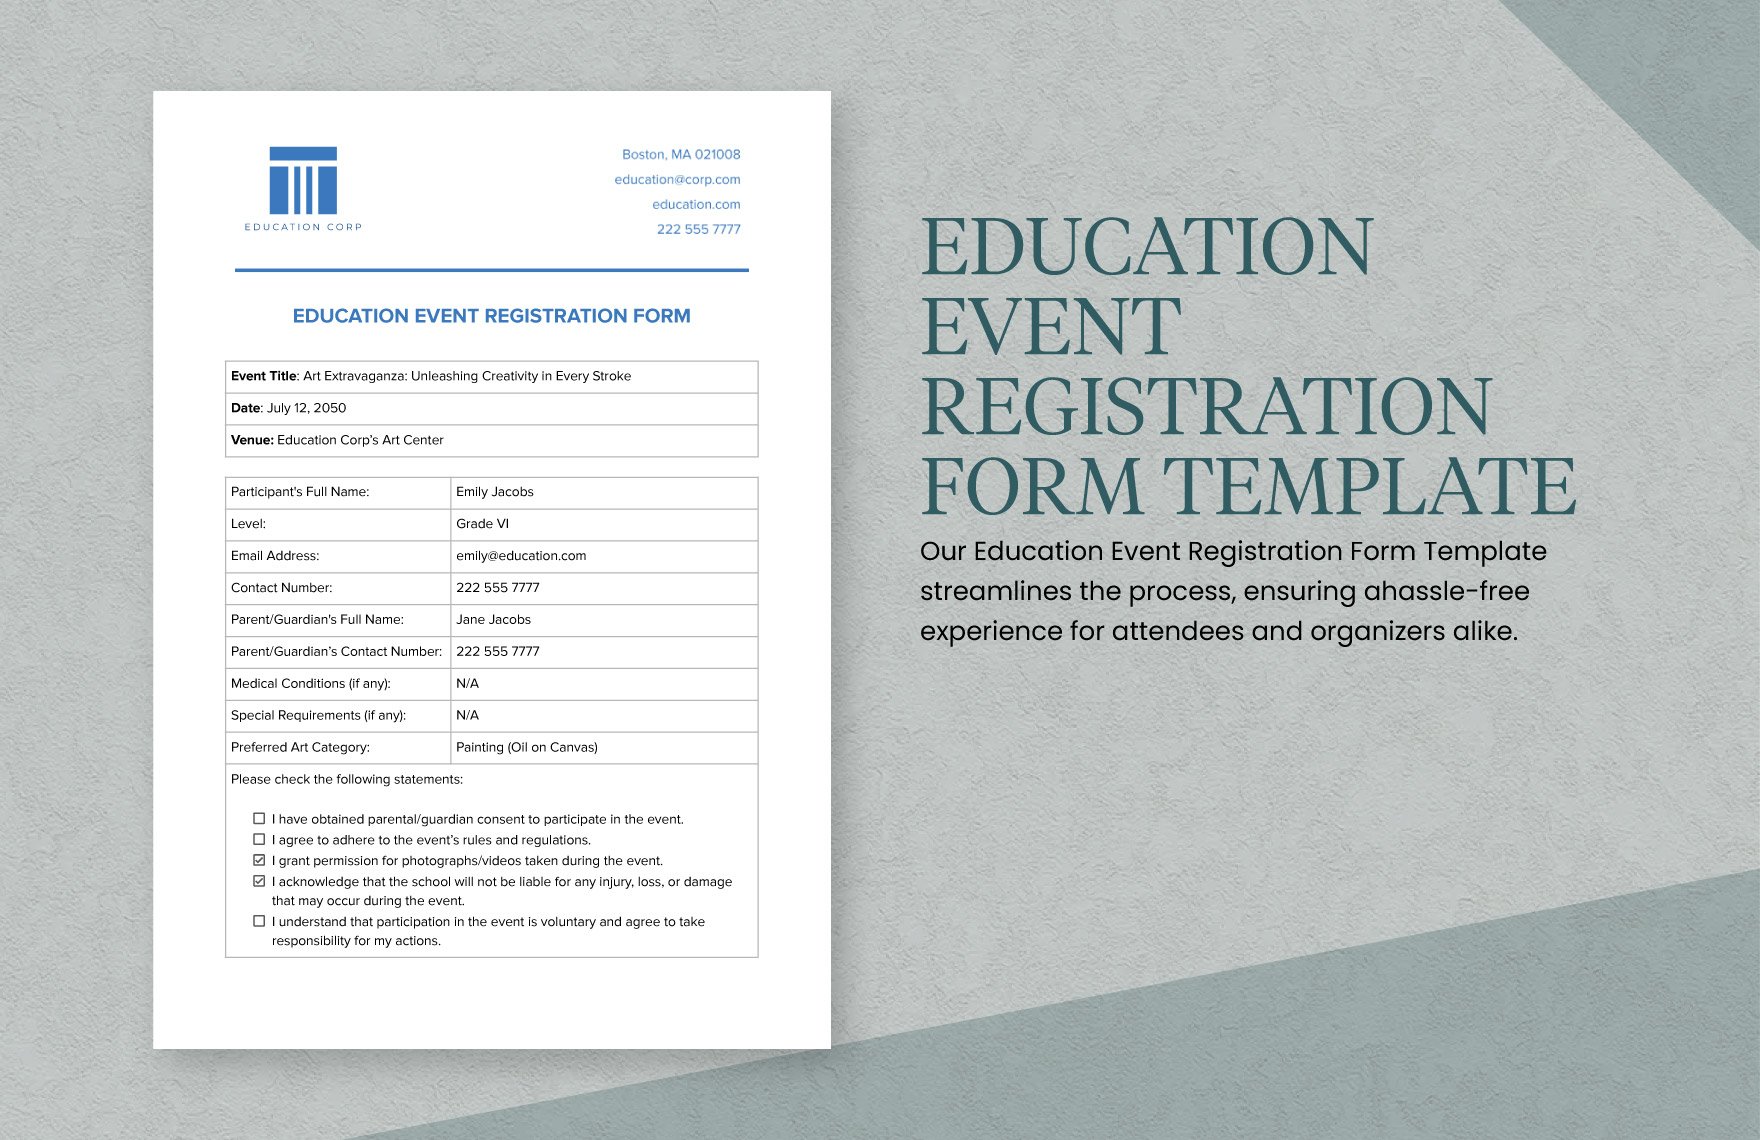 Education Event Registration Form Template in Word, Google Docs, PDF